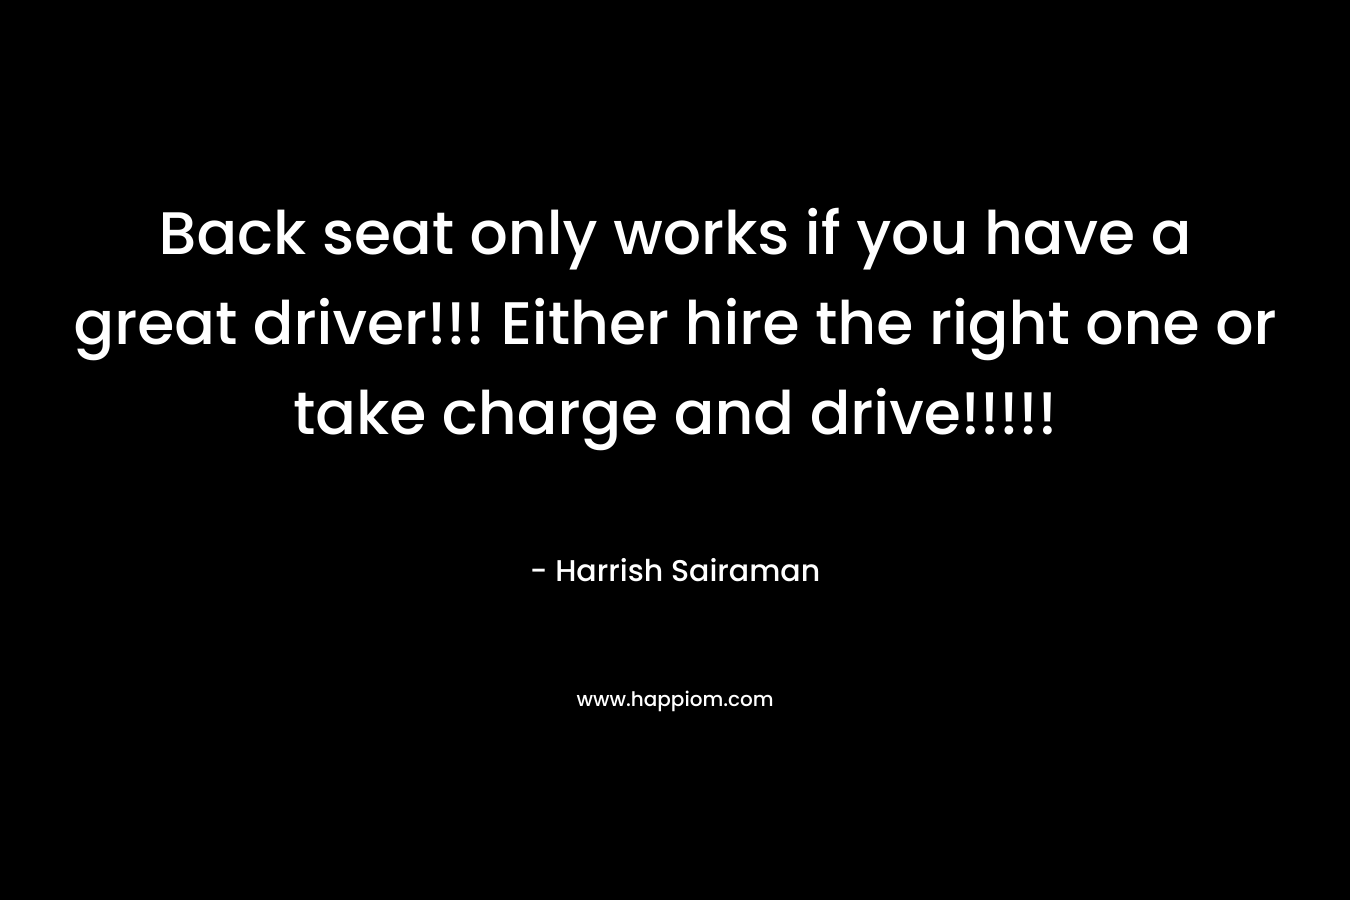 Back seat only works if you have a great driver!!! Either hire the right one or take charge and drive!!!!! – Harrish Sairaman